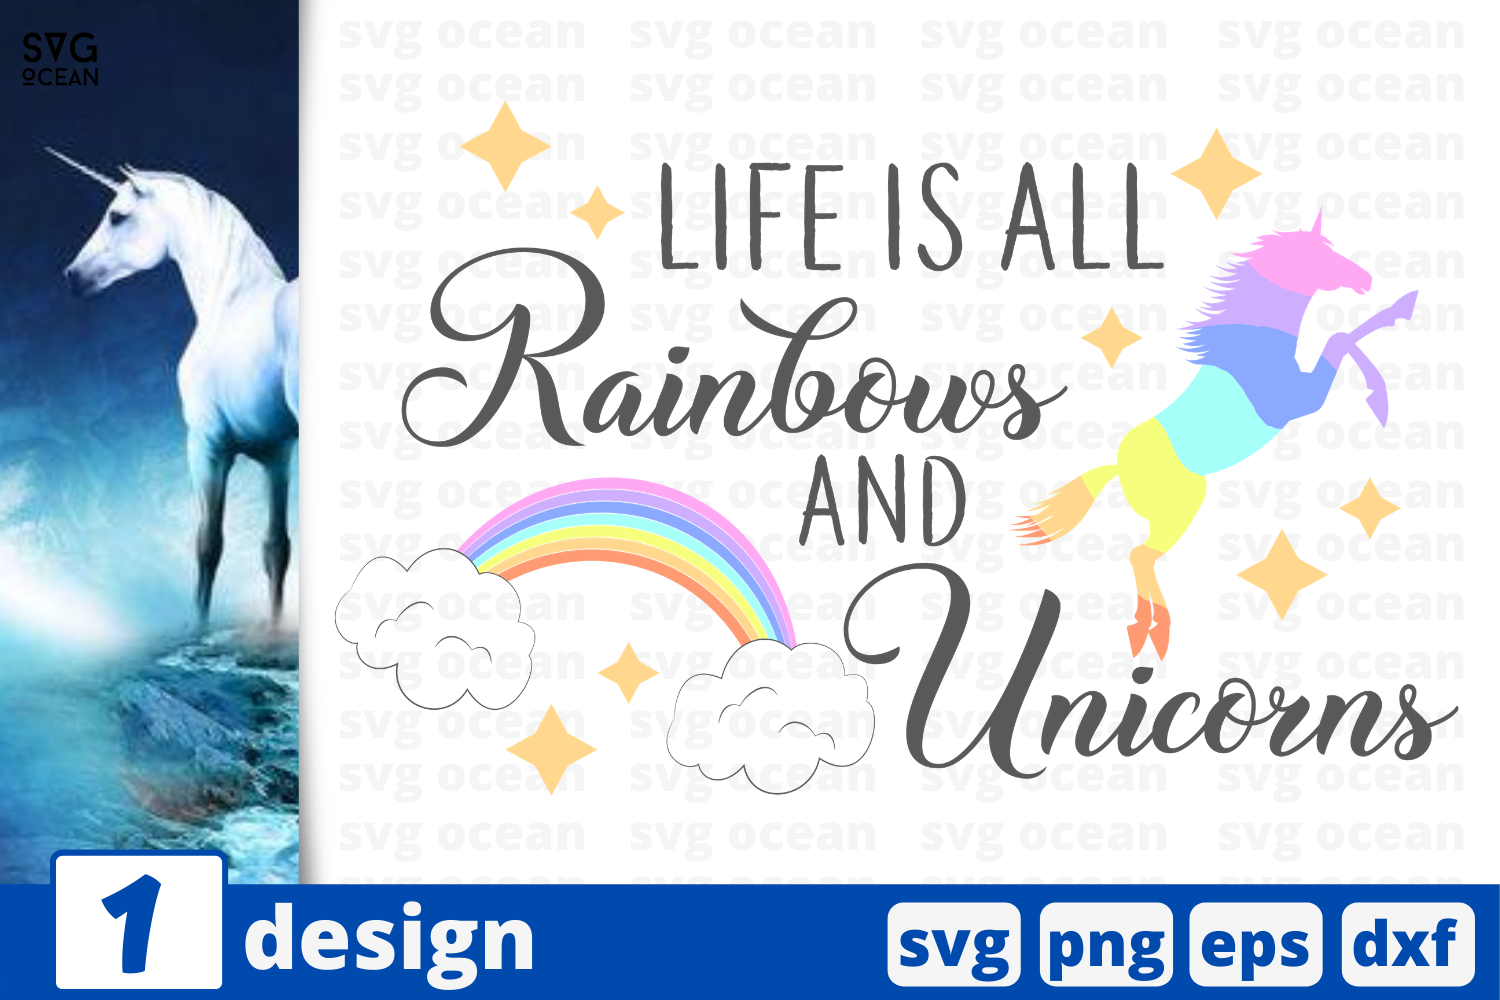 Download 1 Life Is All Rainbows And Unicorns Unicorn Quotes Cricut Svg By Svgocean Thehungryjpeg Com